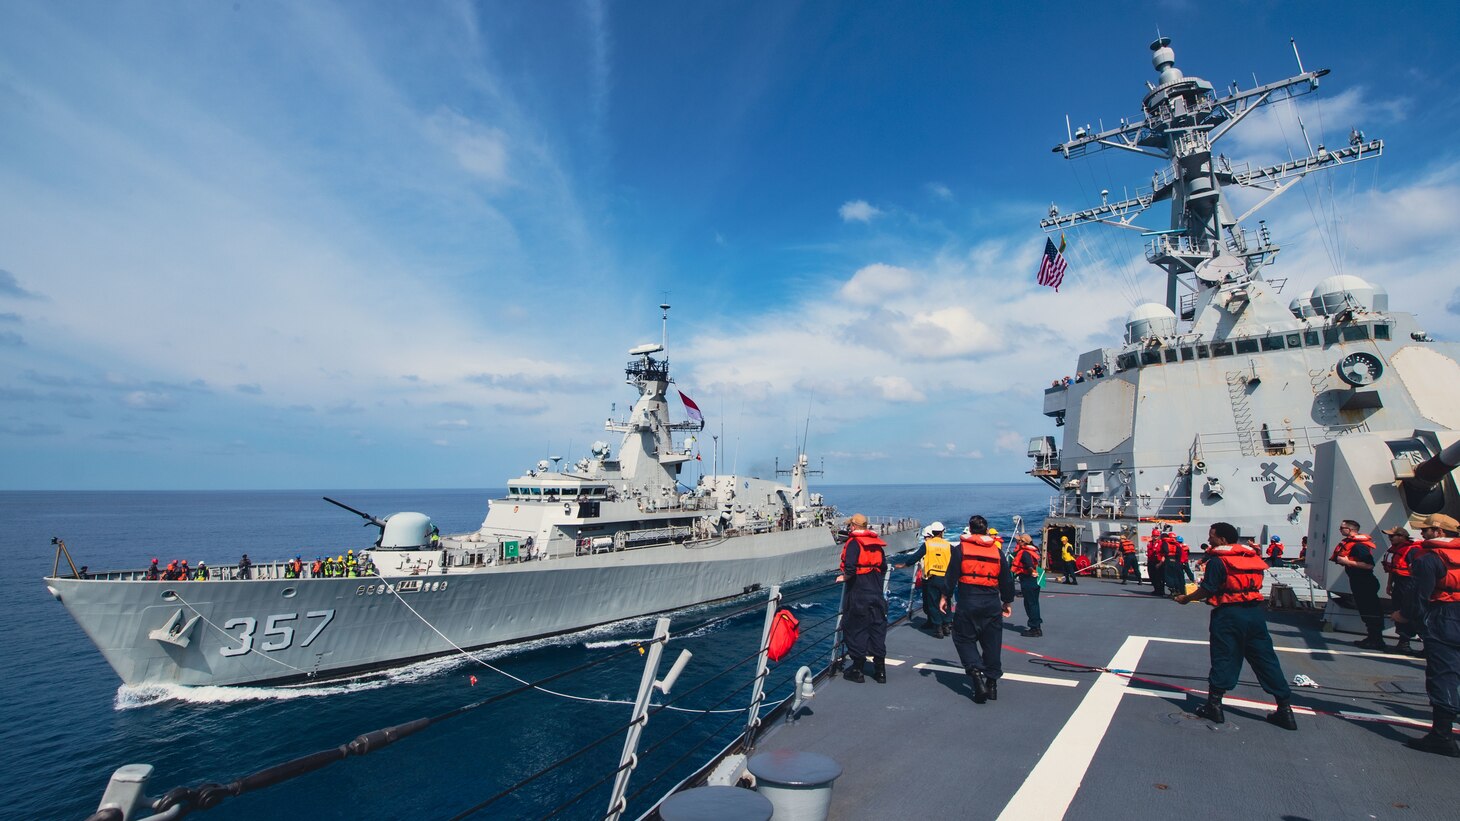 The Arleigh Burke-class guided-missile destroyer USS Momsen (DDG 92) and the Tentara Nasional Indonesia-Angkatan Laut, Bung Tomo-class corvette KRI Bung Tomo (FF 357) conducted bilateral training, providing the U.S. and Indonesian navies an opportunity to exercise and work together towards common maritime goals. Bilateral operations like this one reassure our allies and partner of the U.S. commitment to maintaining a free and open Indo-Pacific.